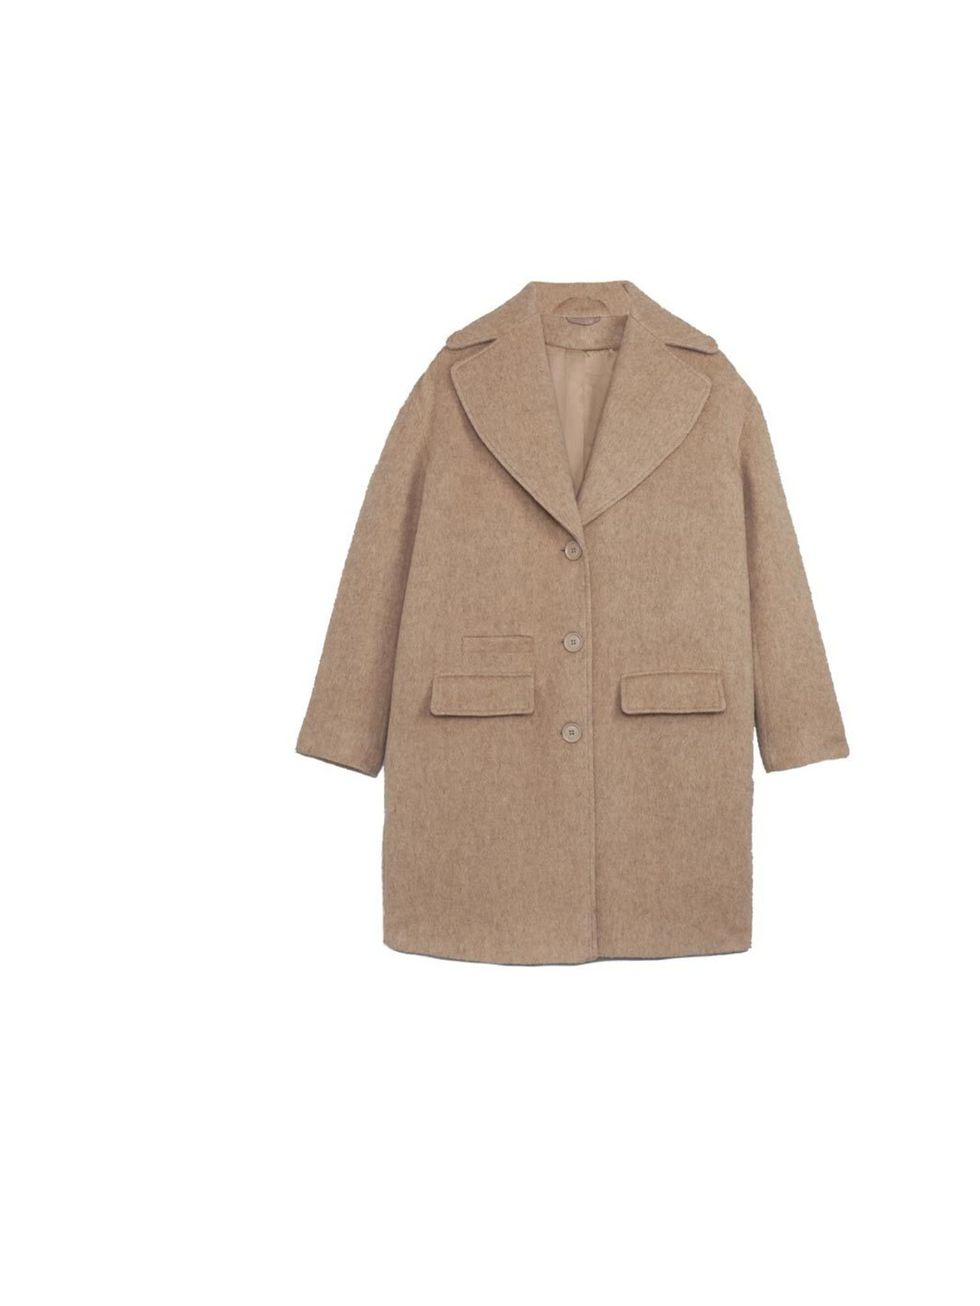 <p>In a season of coats we're spoilt for choice when it comes to outerwear but this <a href="http://www.stories.com/New_in/Ready-to-wear/Wool-blend_coat/591735-1736731.1">&amp;Other Stories</a> oversize number is high on our must-have list, £145</p>